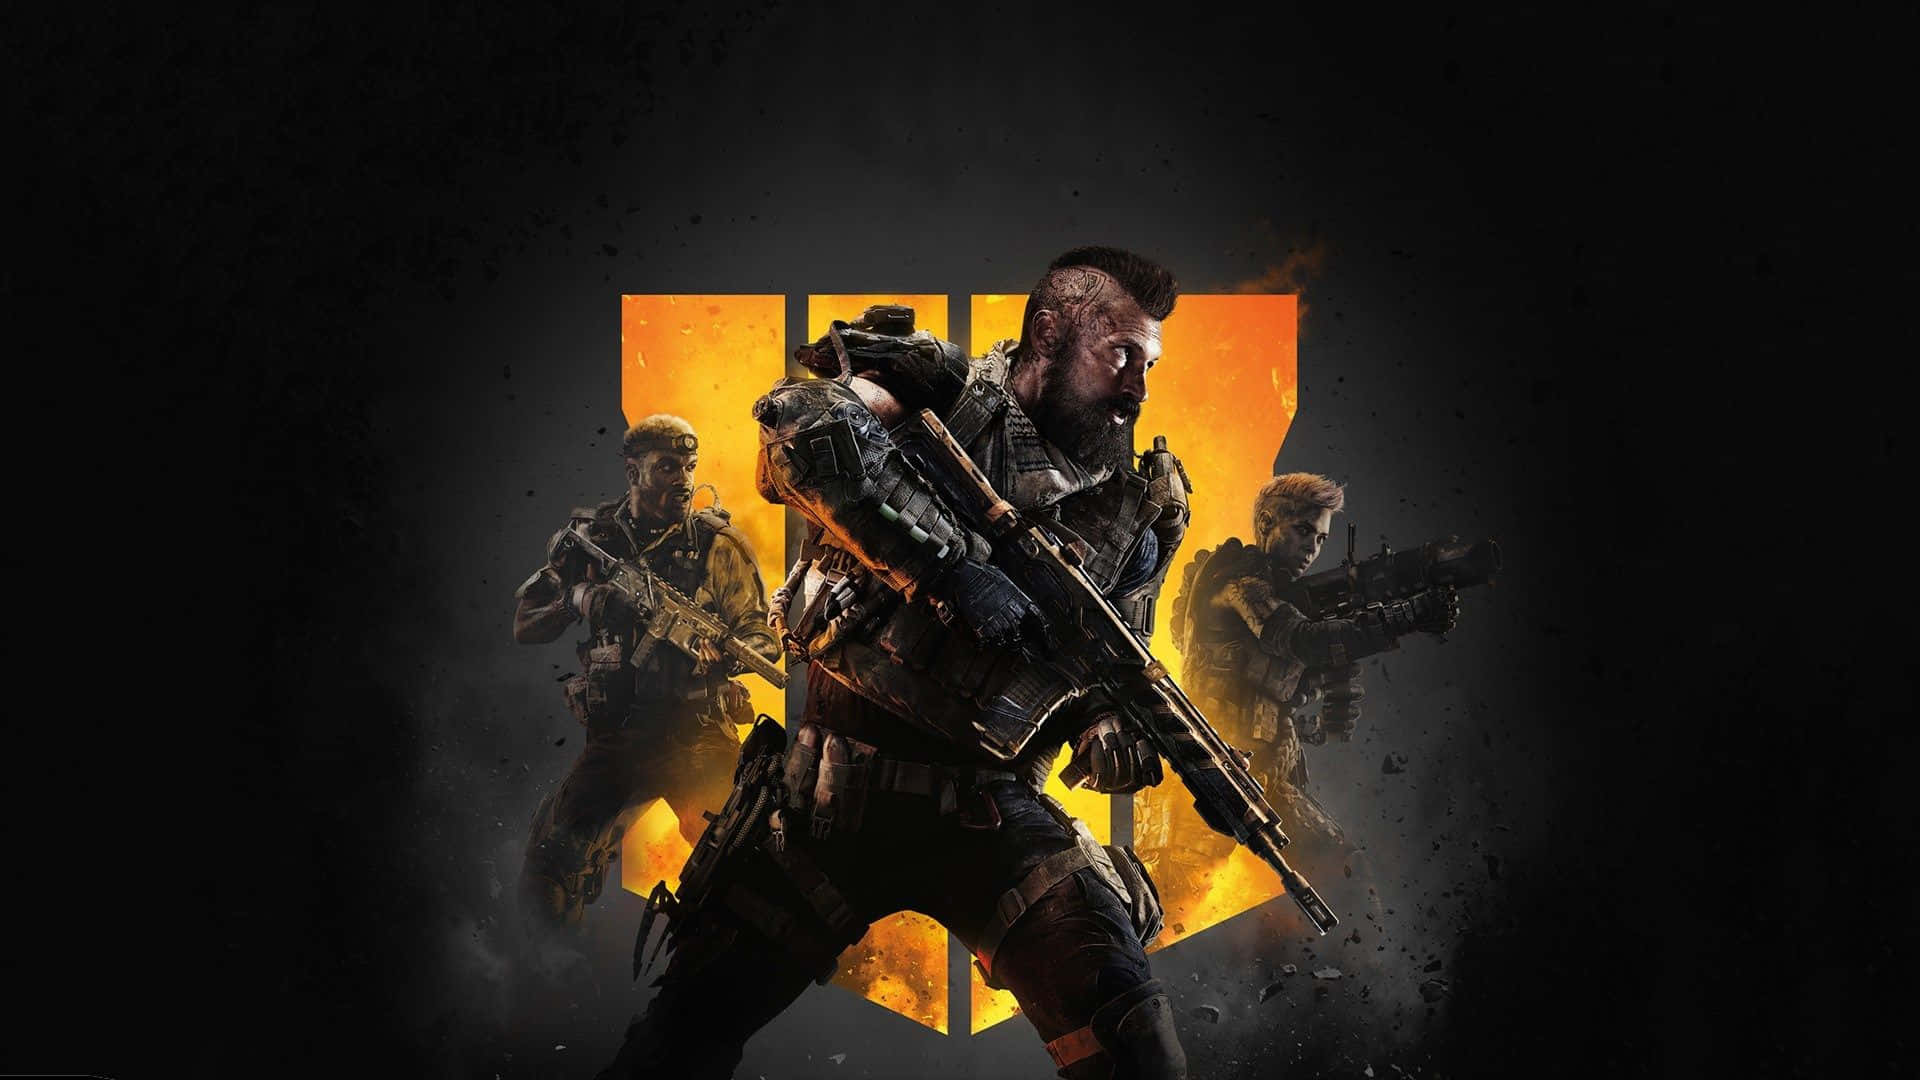 Caption: Intense action with Call of Duty Black Ops 4 in 4K Ultra HD Gaming Wallpaper